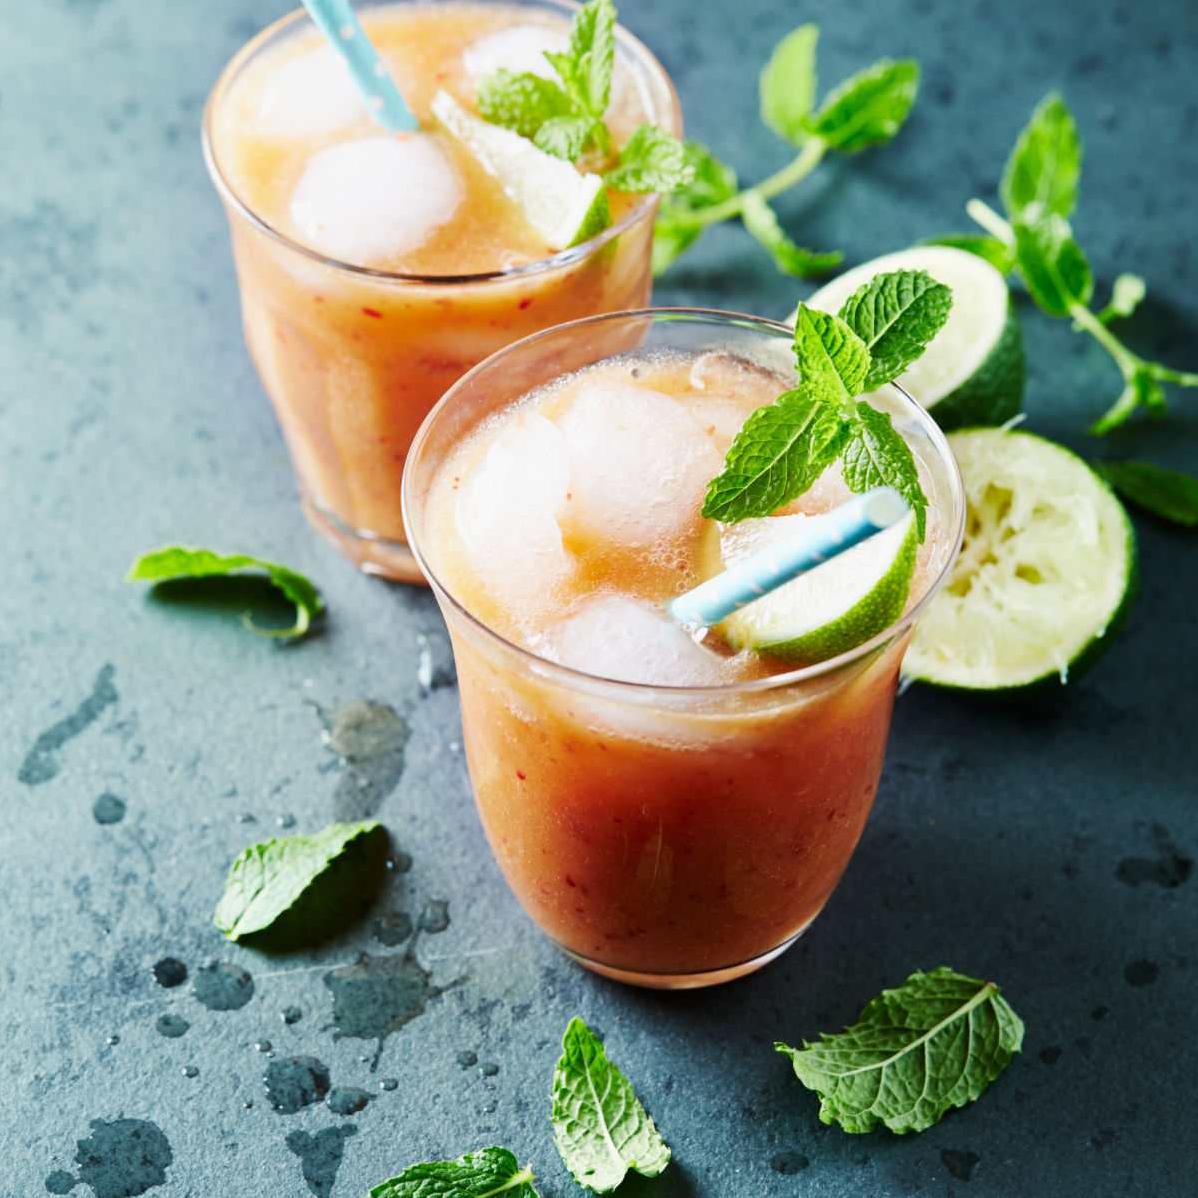  This sweet and tangy sip will take you on a journey down to the southern comfort zone.